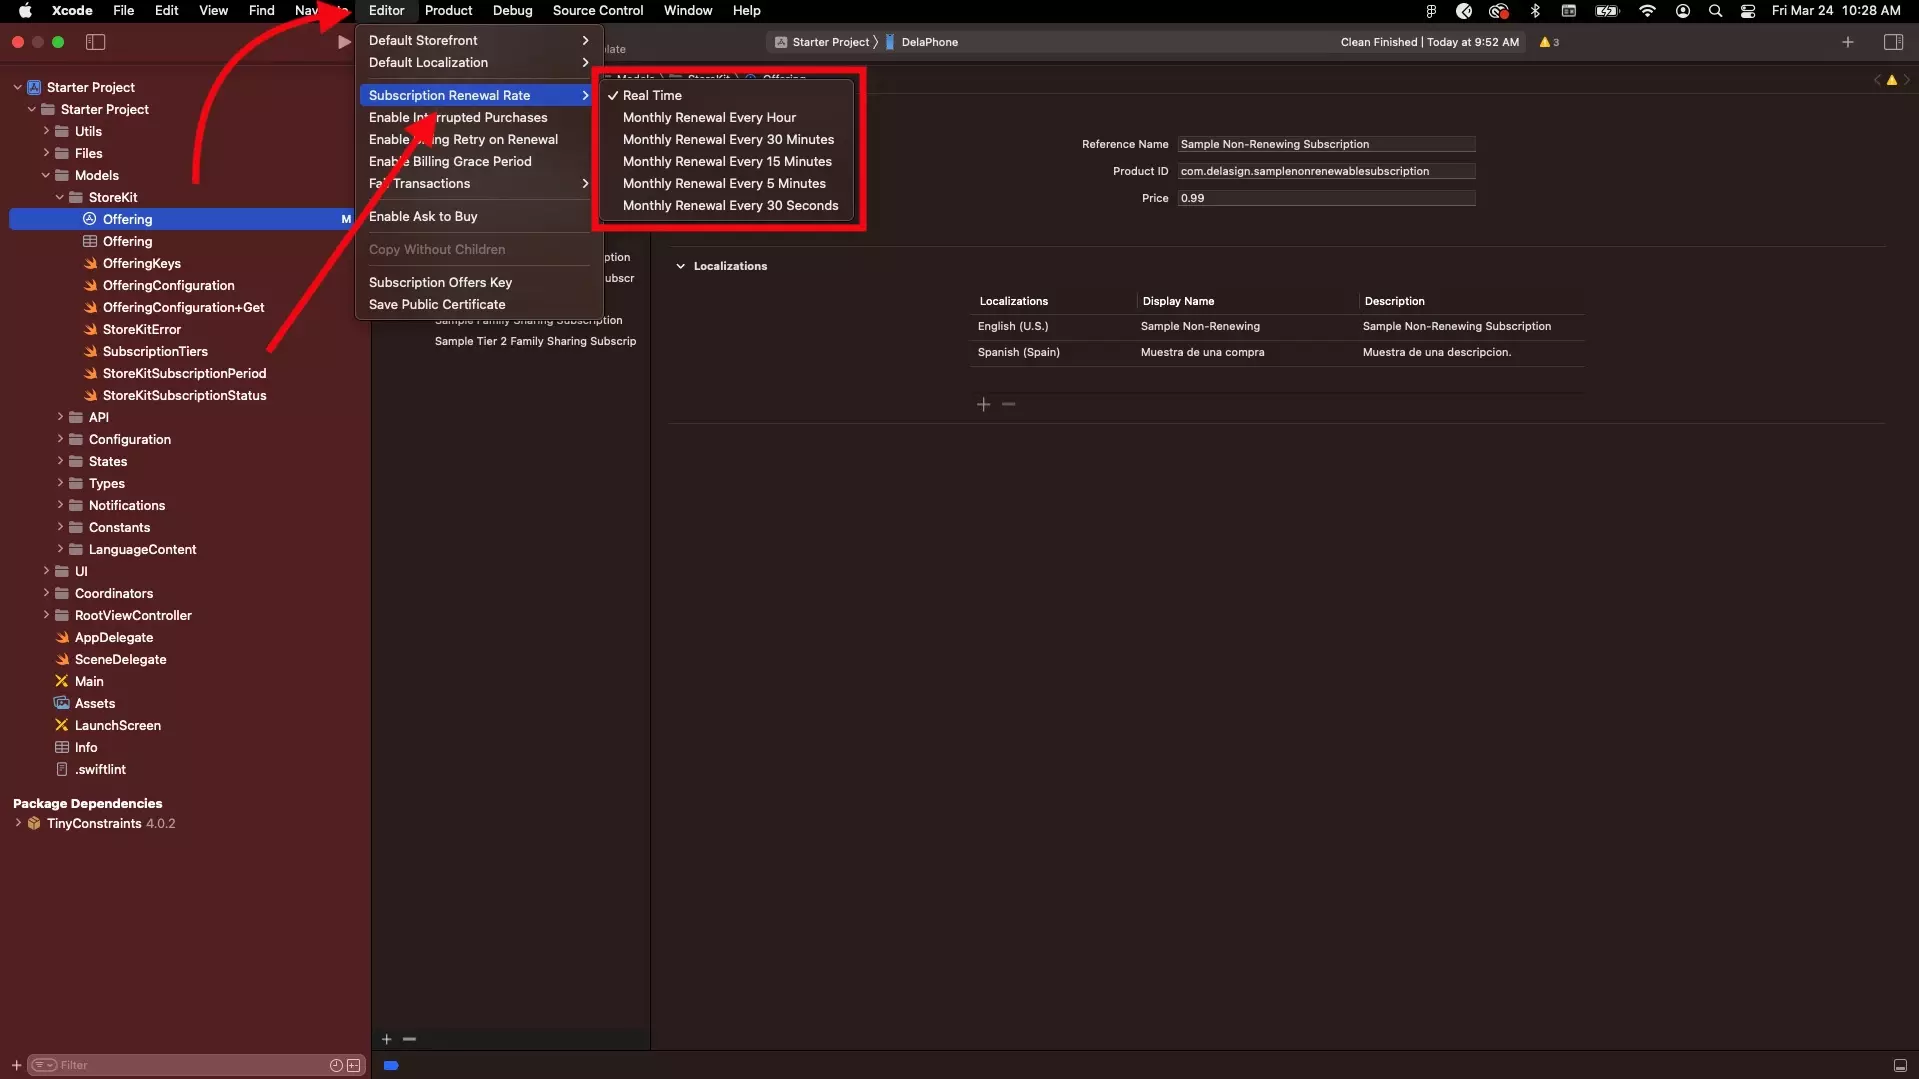 A screenshot of Xcode highlighting the location of the Editor tab in the Xcode menu, the Subscription Renewal Rate menu option and the menu that appears where you can select a Subscription Renewal Rate.